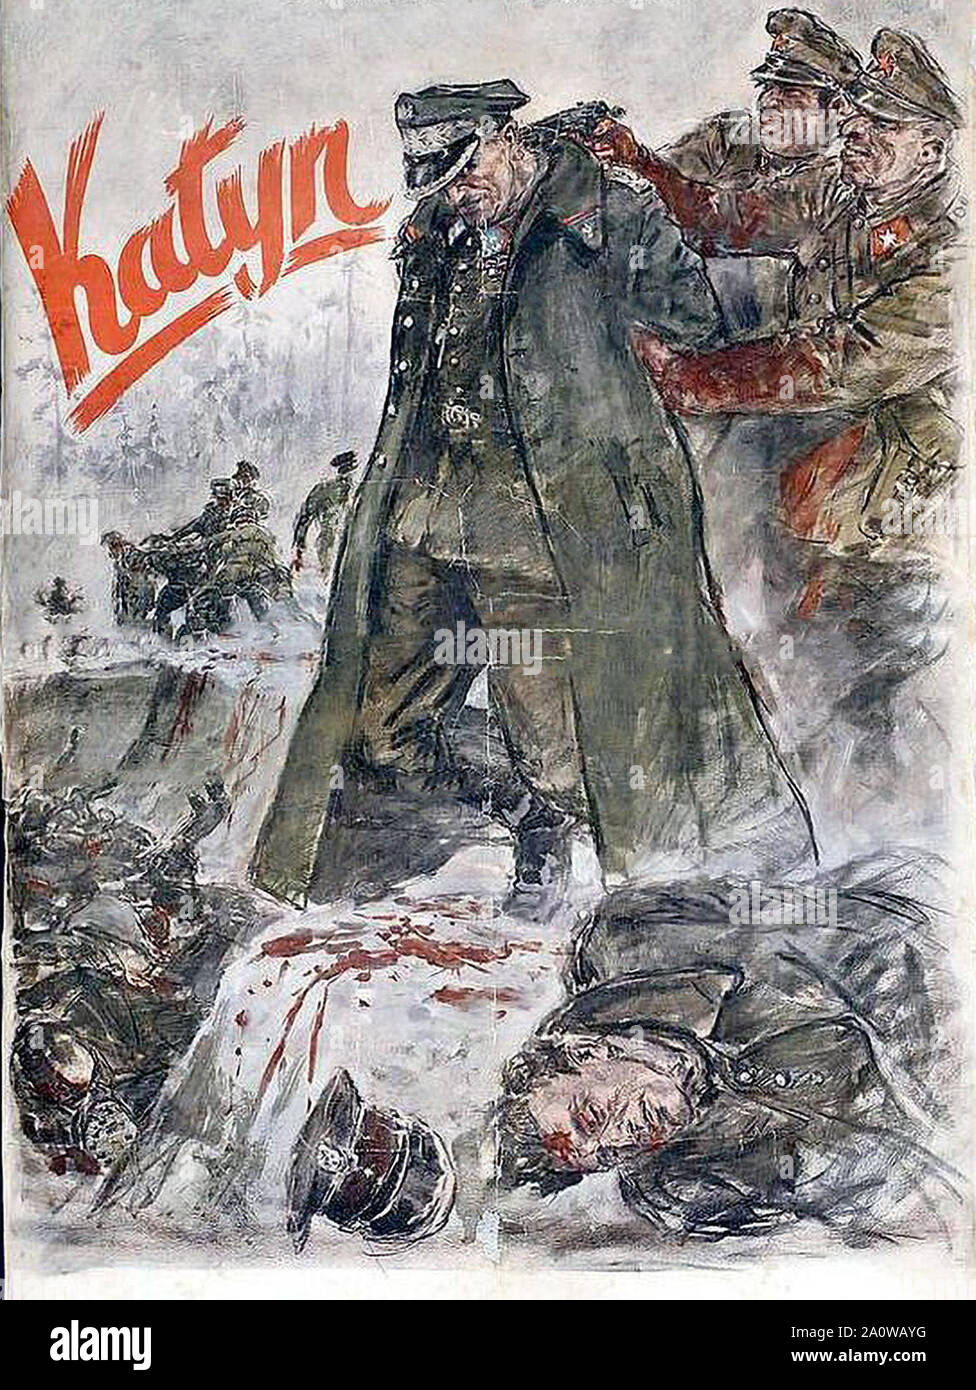 The Katyn Forest Massacre KATYN FOREST (Smolensk, 1939-40) In 1939, during the Russian invasion of Poland, some 14,500 Polish officers were captured and interned in three P.O.W. camps in the Soviet Union.